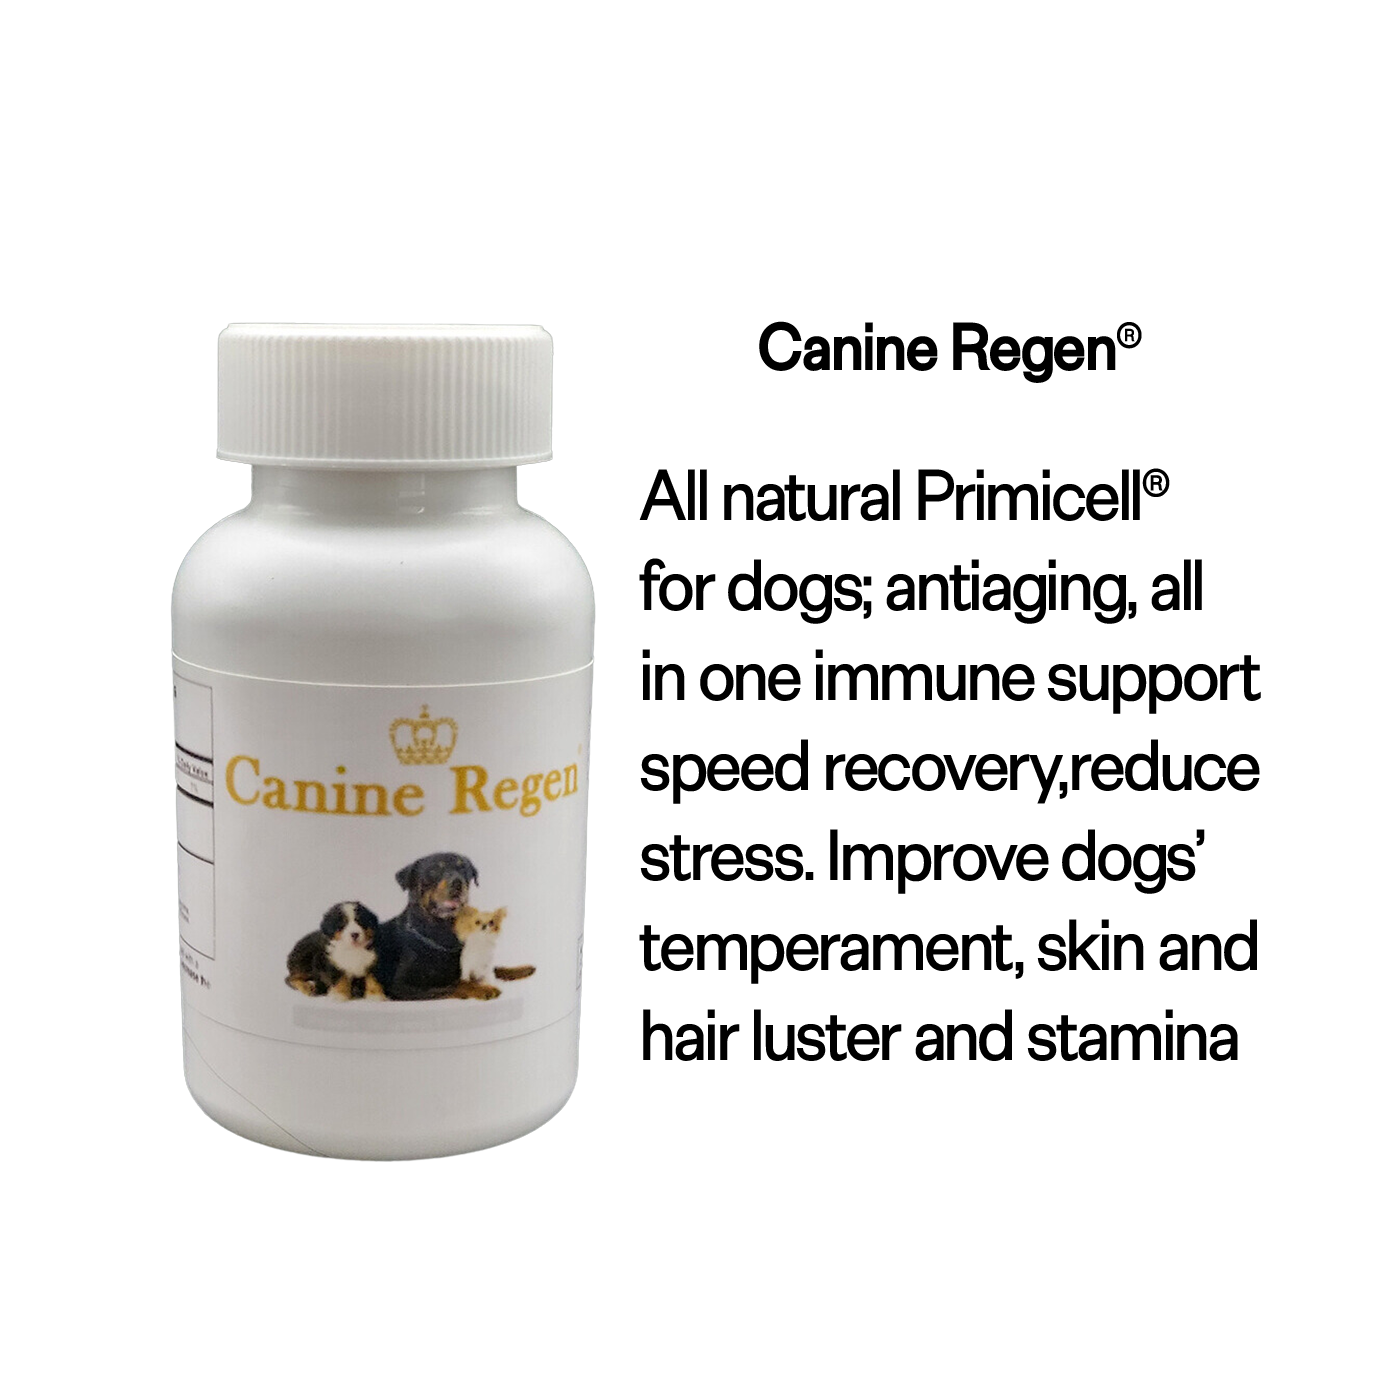 natural supplement for dogs - immune support help speed recovery, reduce stress.